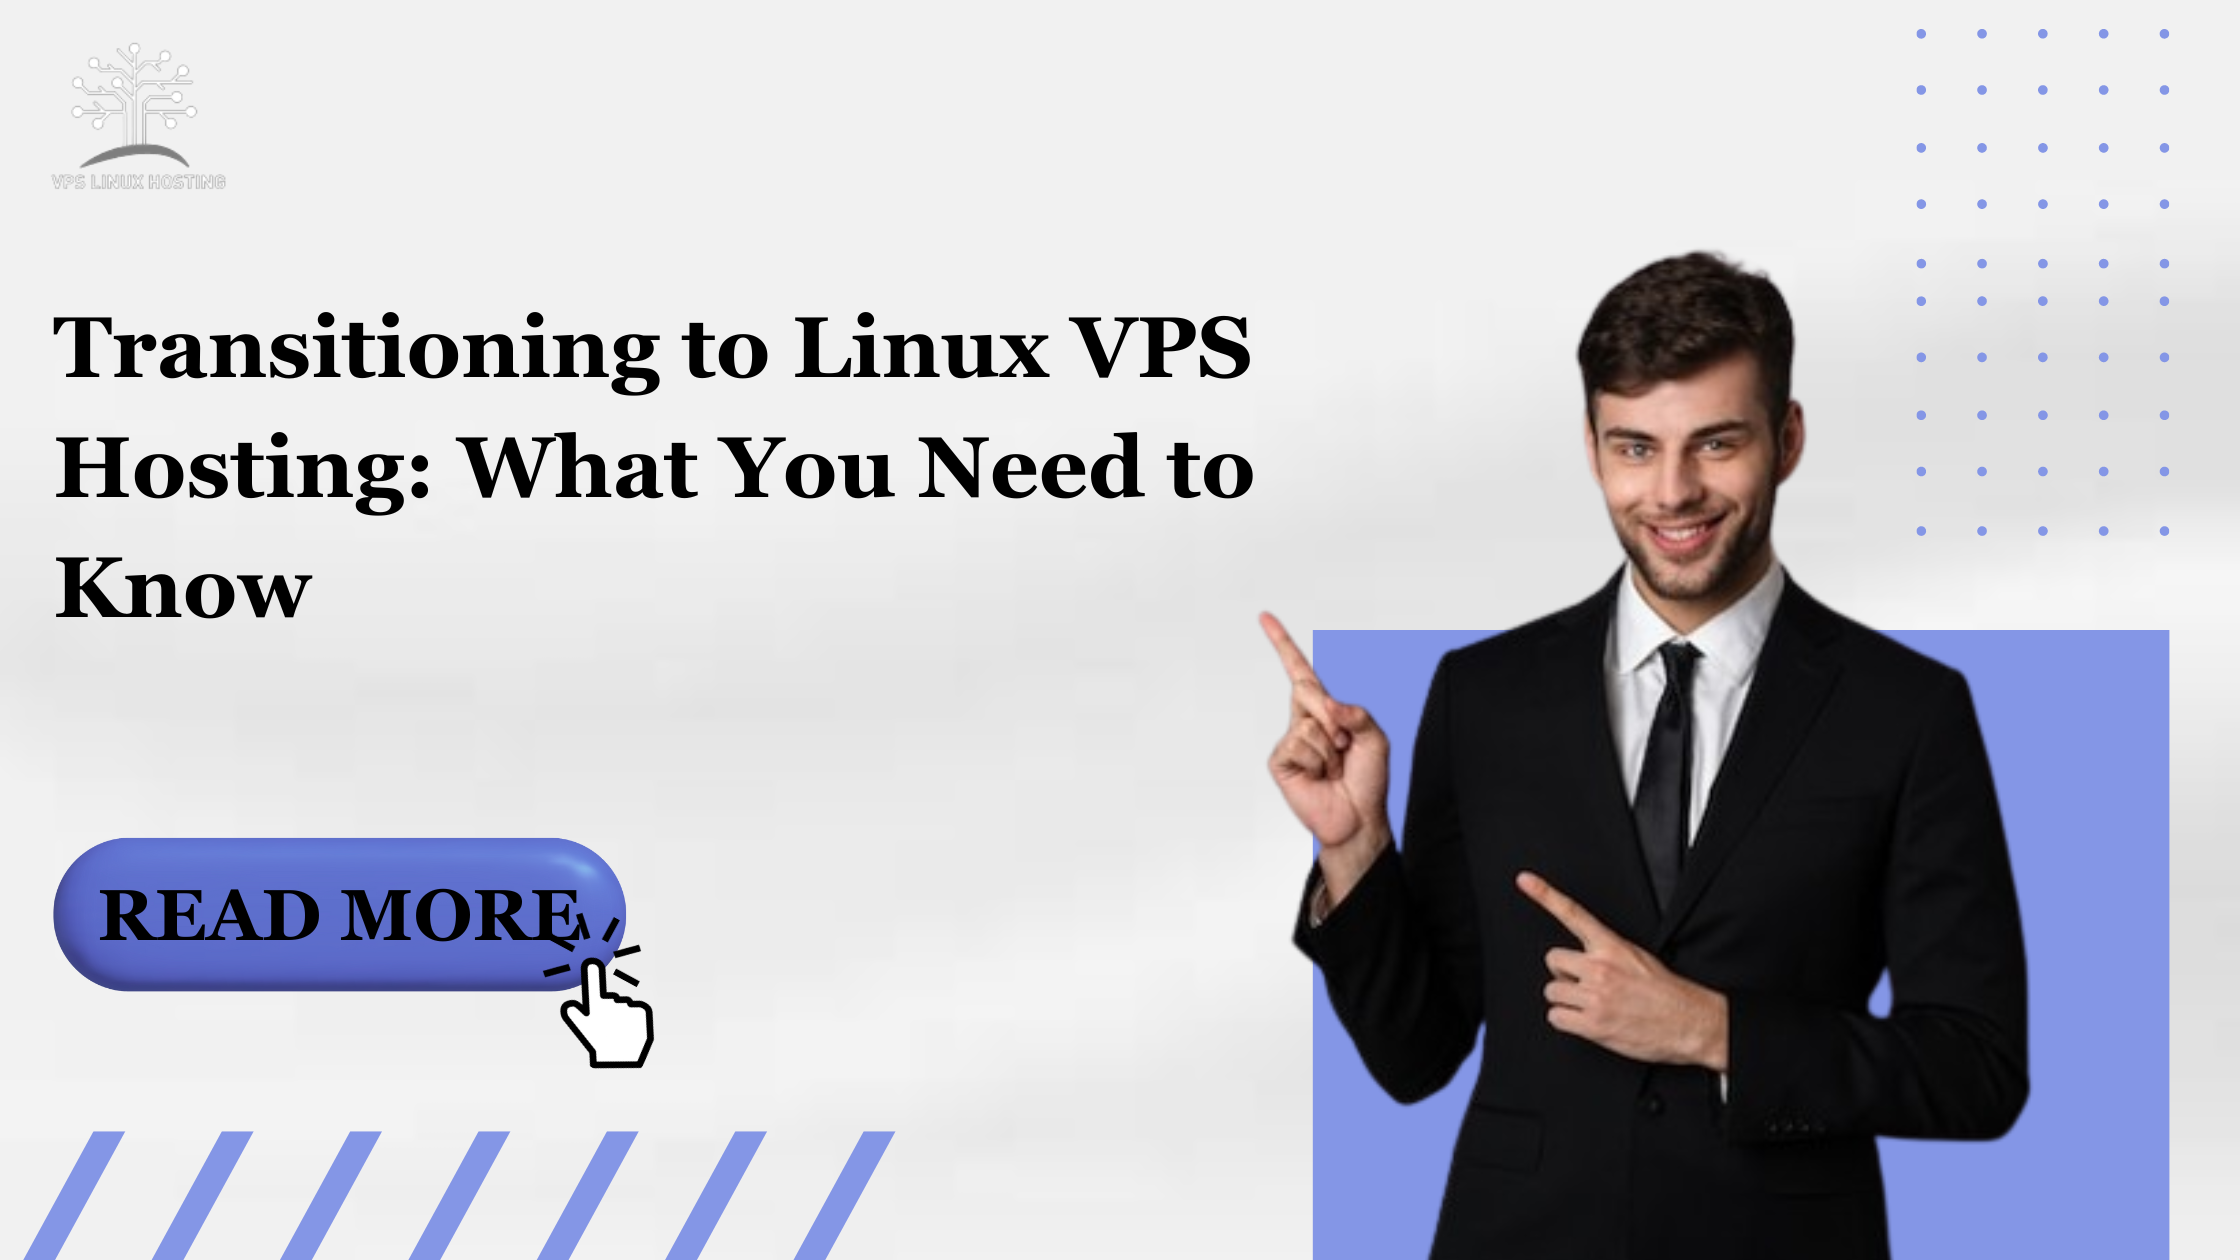 Transitioning to Linux VPS Hosting: What You Need to Know